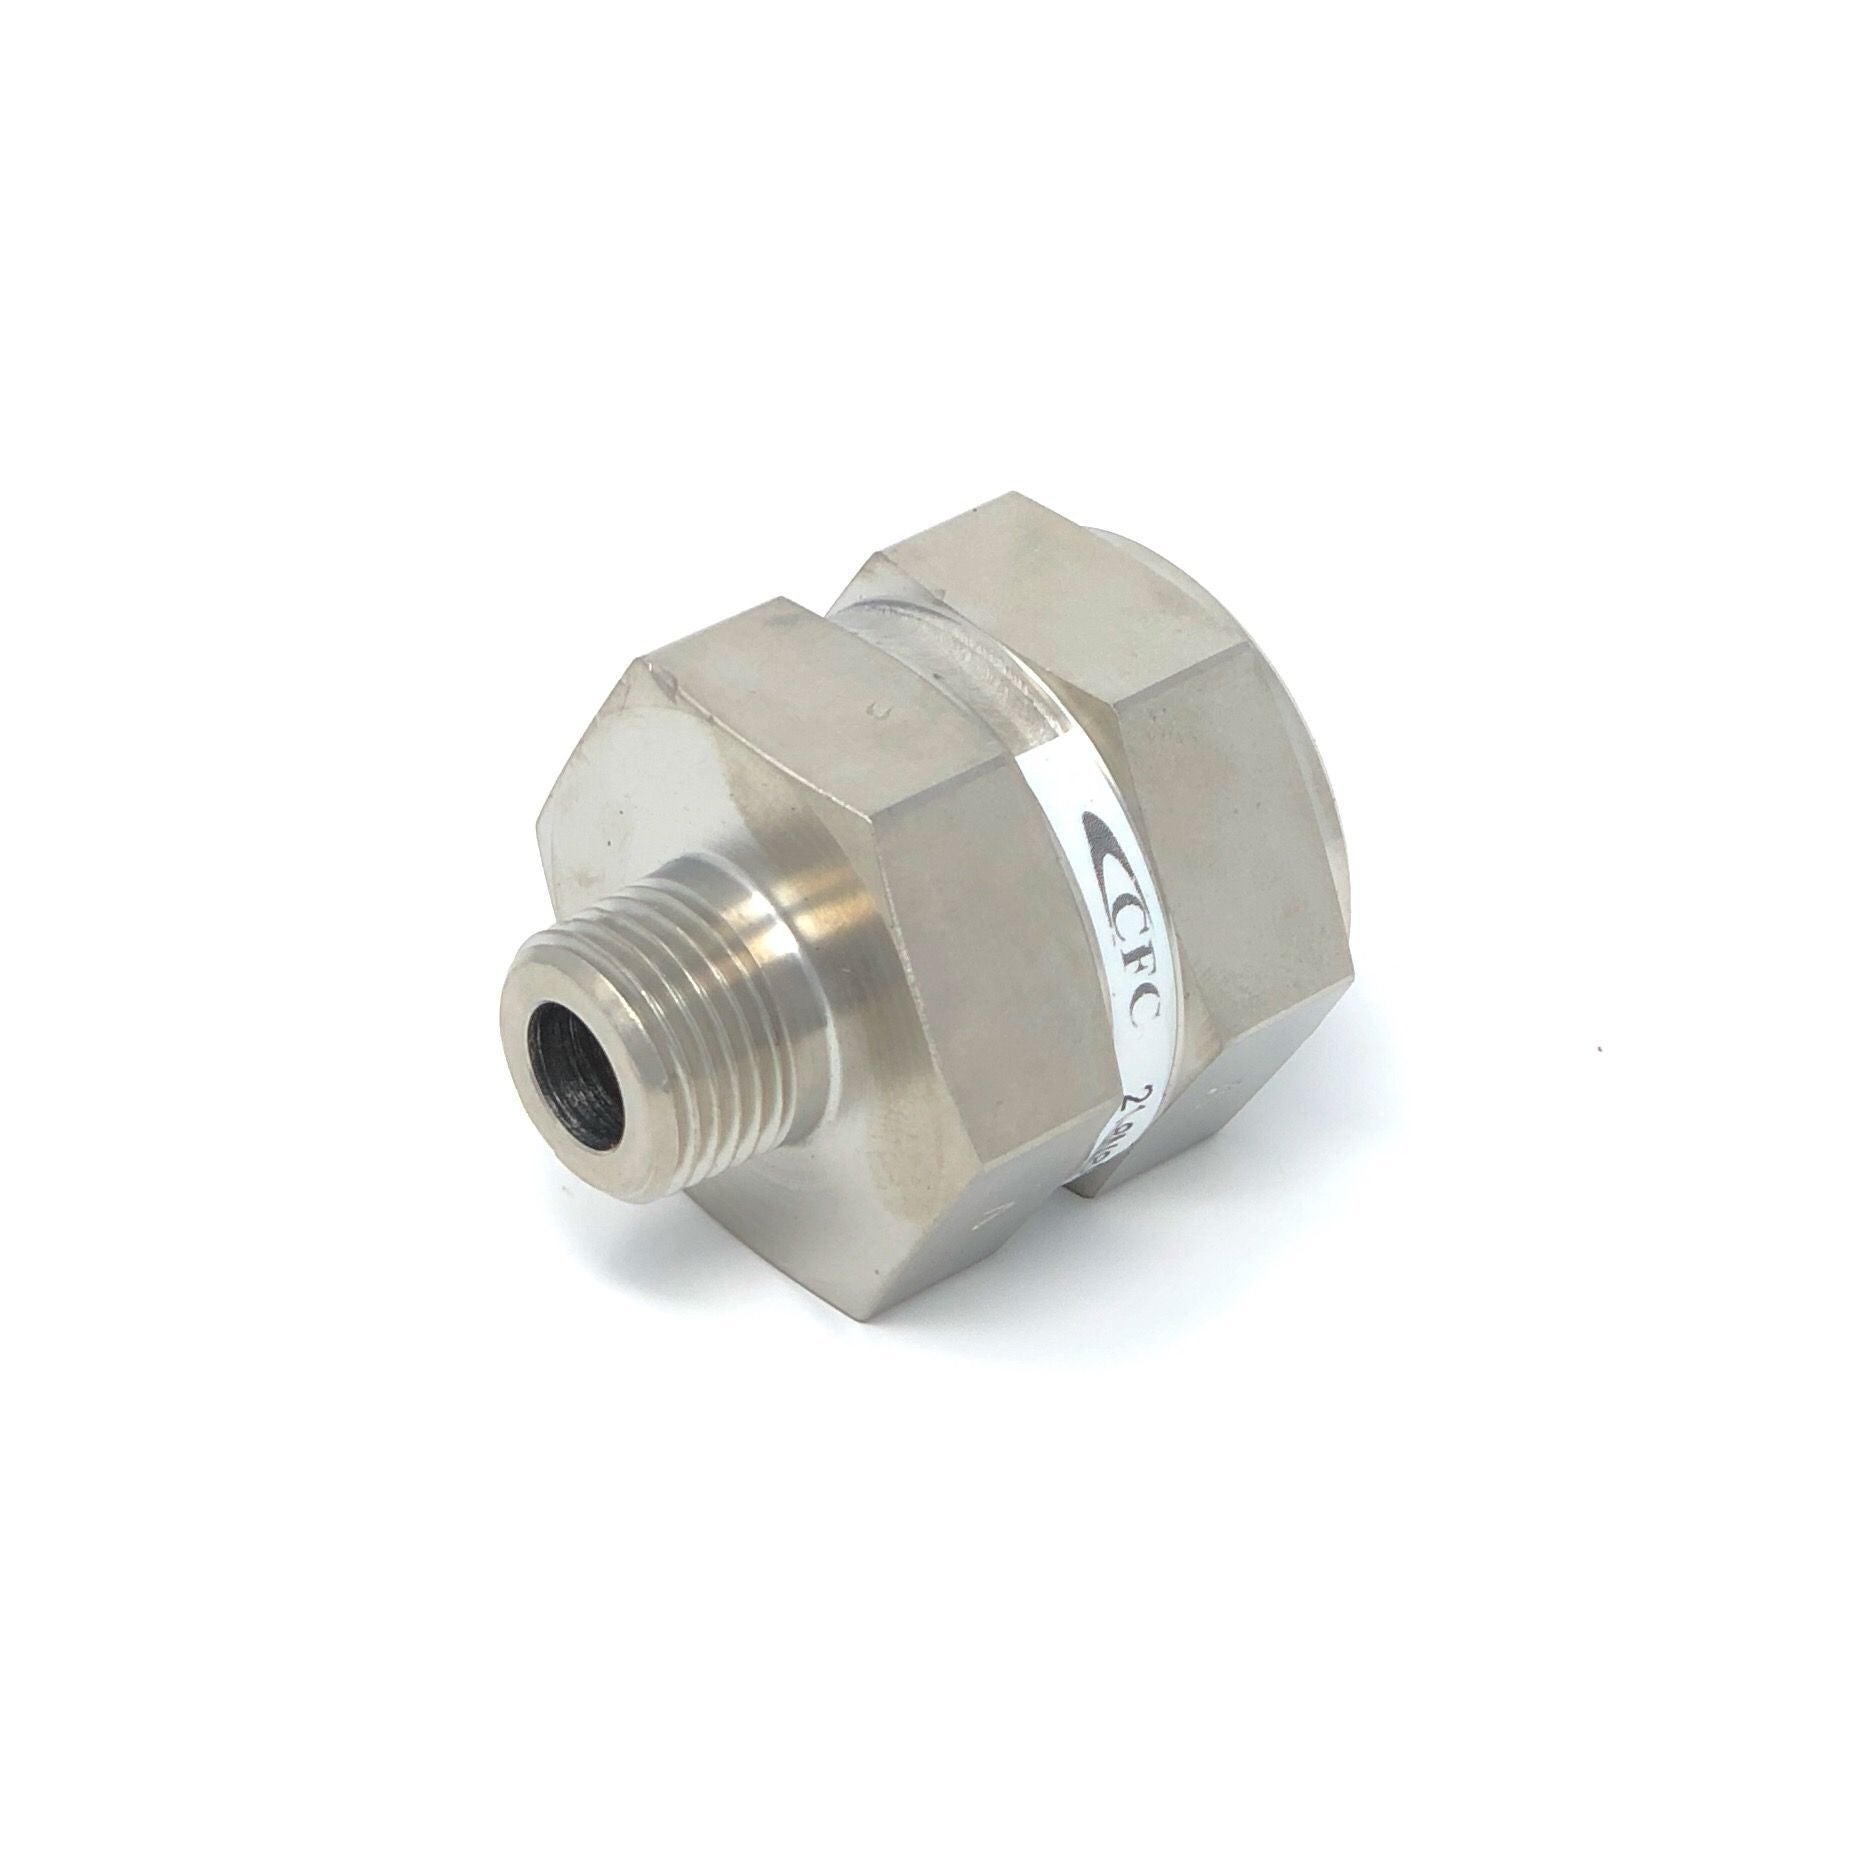 21-6S6S-18S : Chase High Pressure Inline Filter, 6000psi, #6 SAE (3/8") , 18 Micron, No Visual Indicator, No Bypass